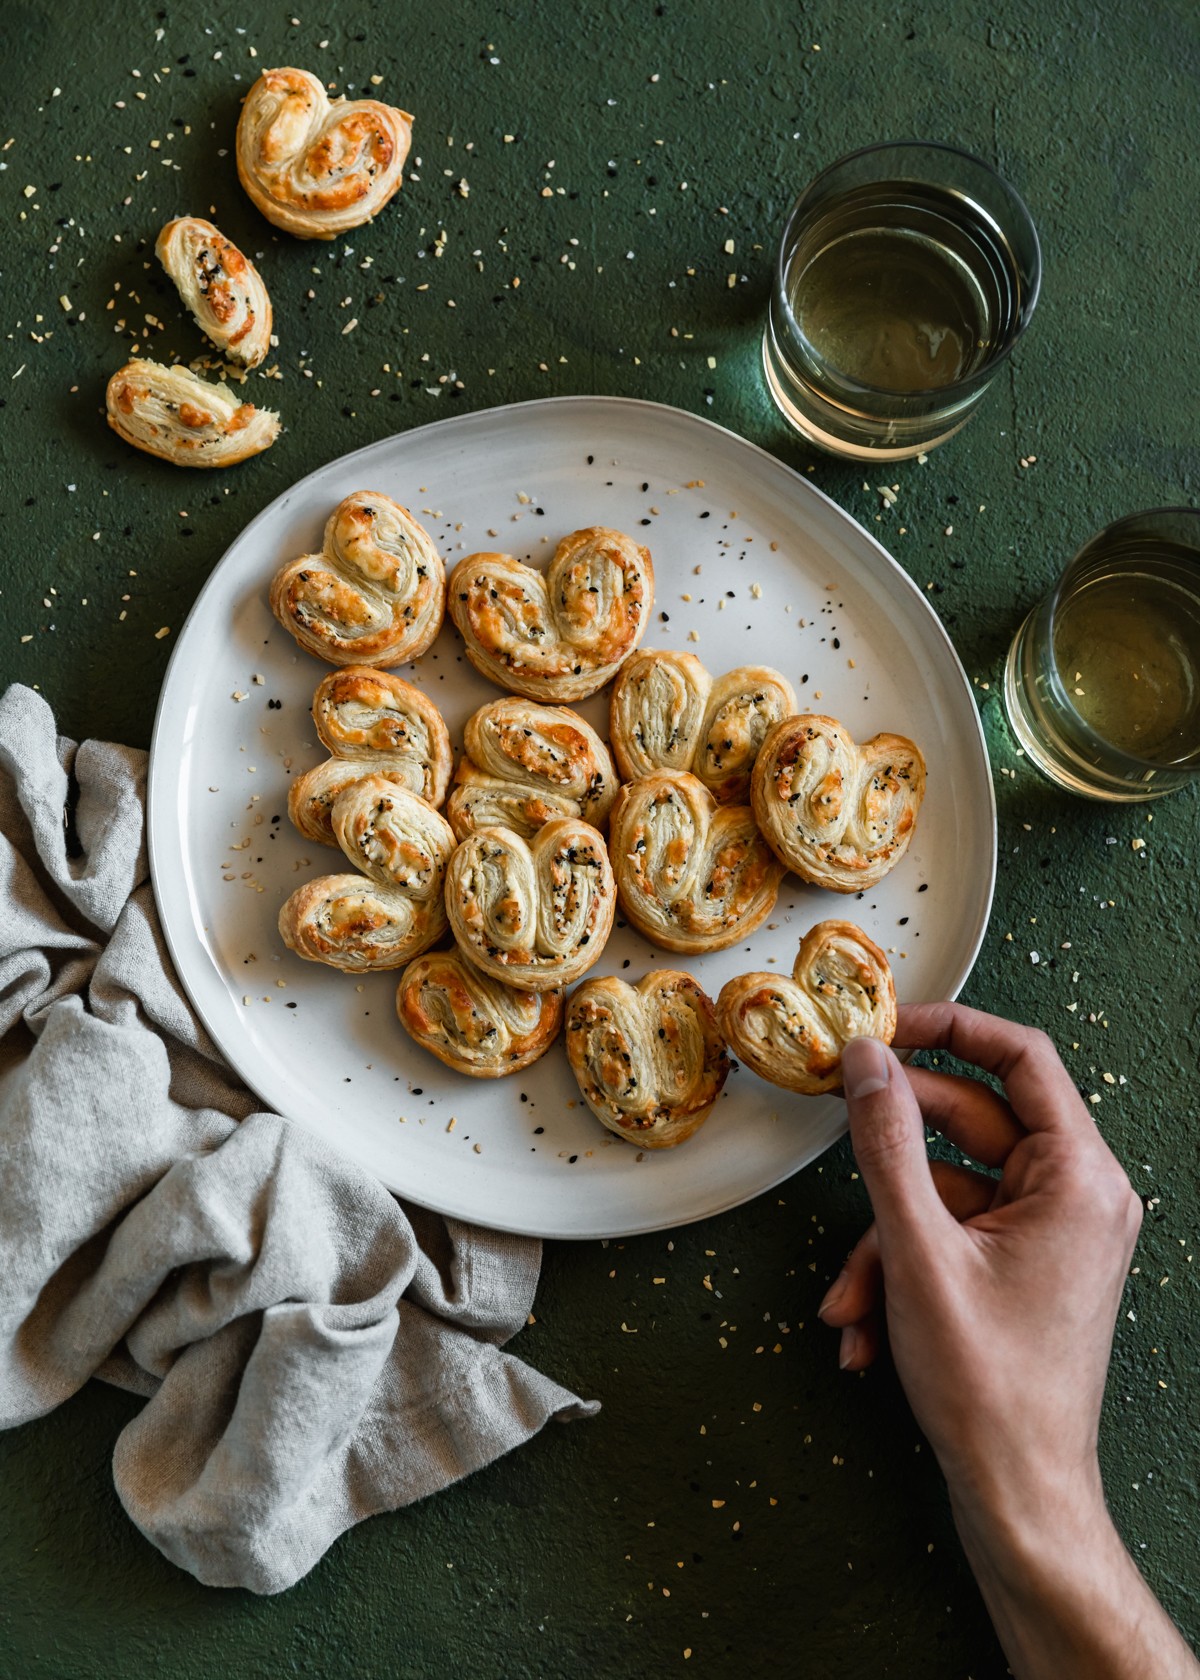 On overhead image of a man's hand grabbing a savory palmier with parmesan and everything spice from a white plate of palmiers. The plate is on a dark green table spinkled with everything bagel spice next to two glasses of white wine and a beige linen.